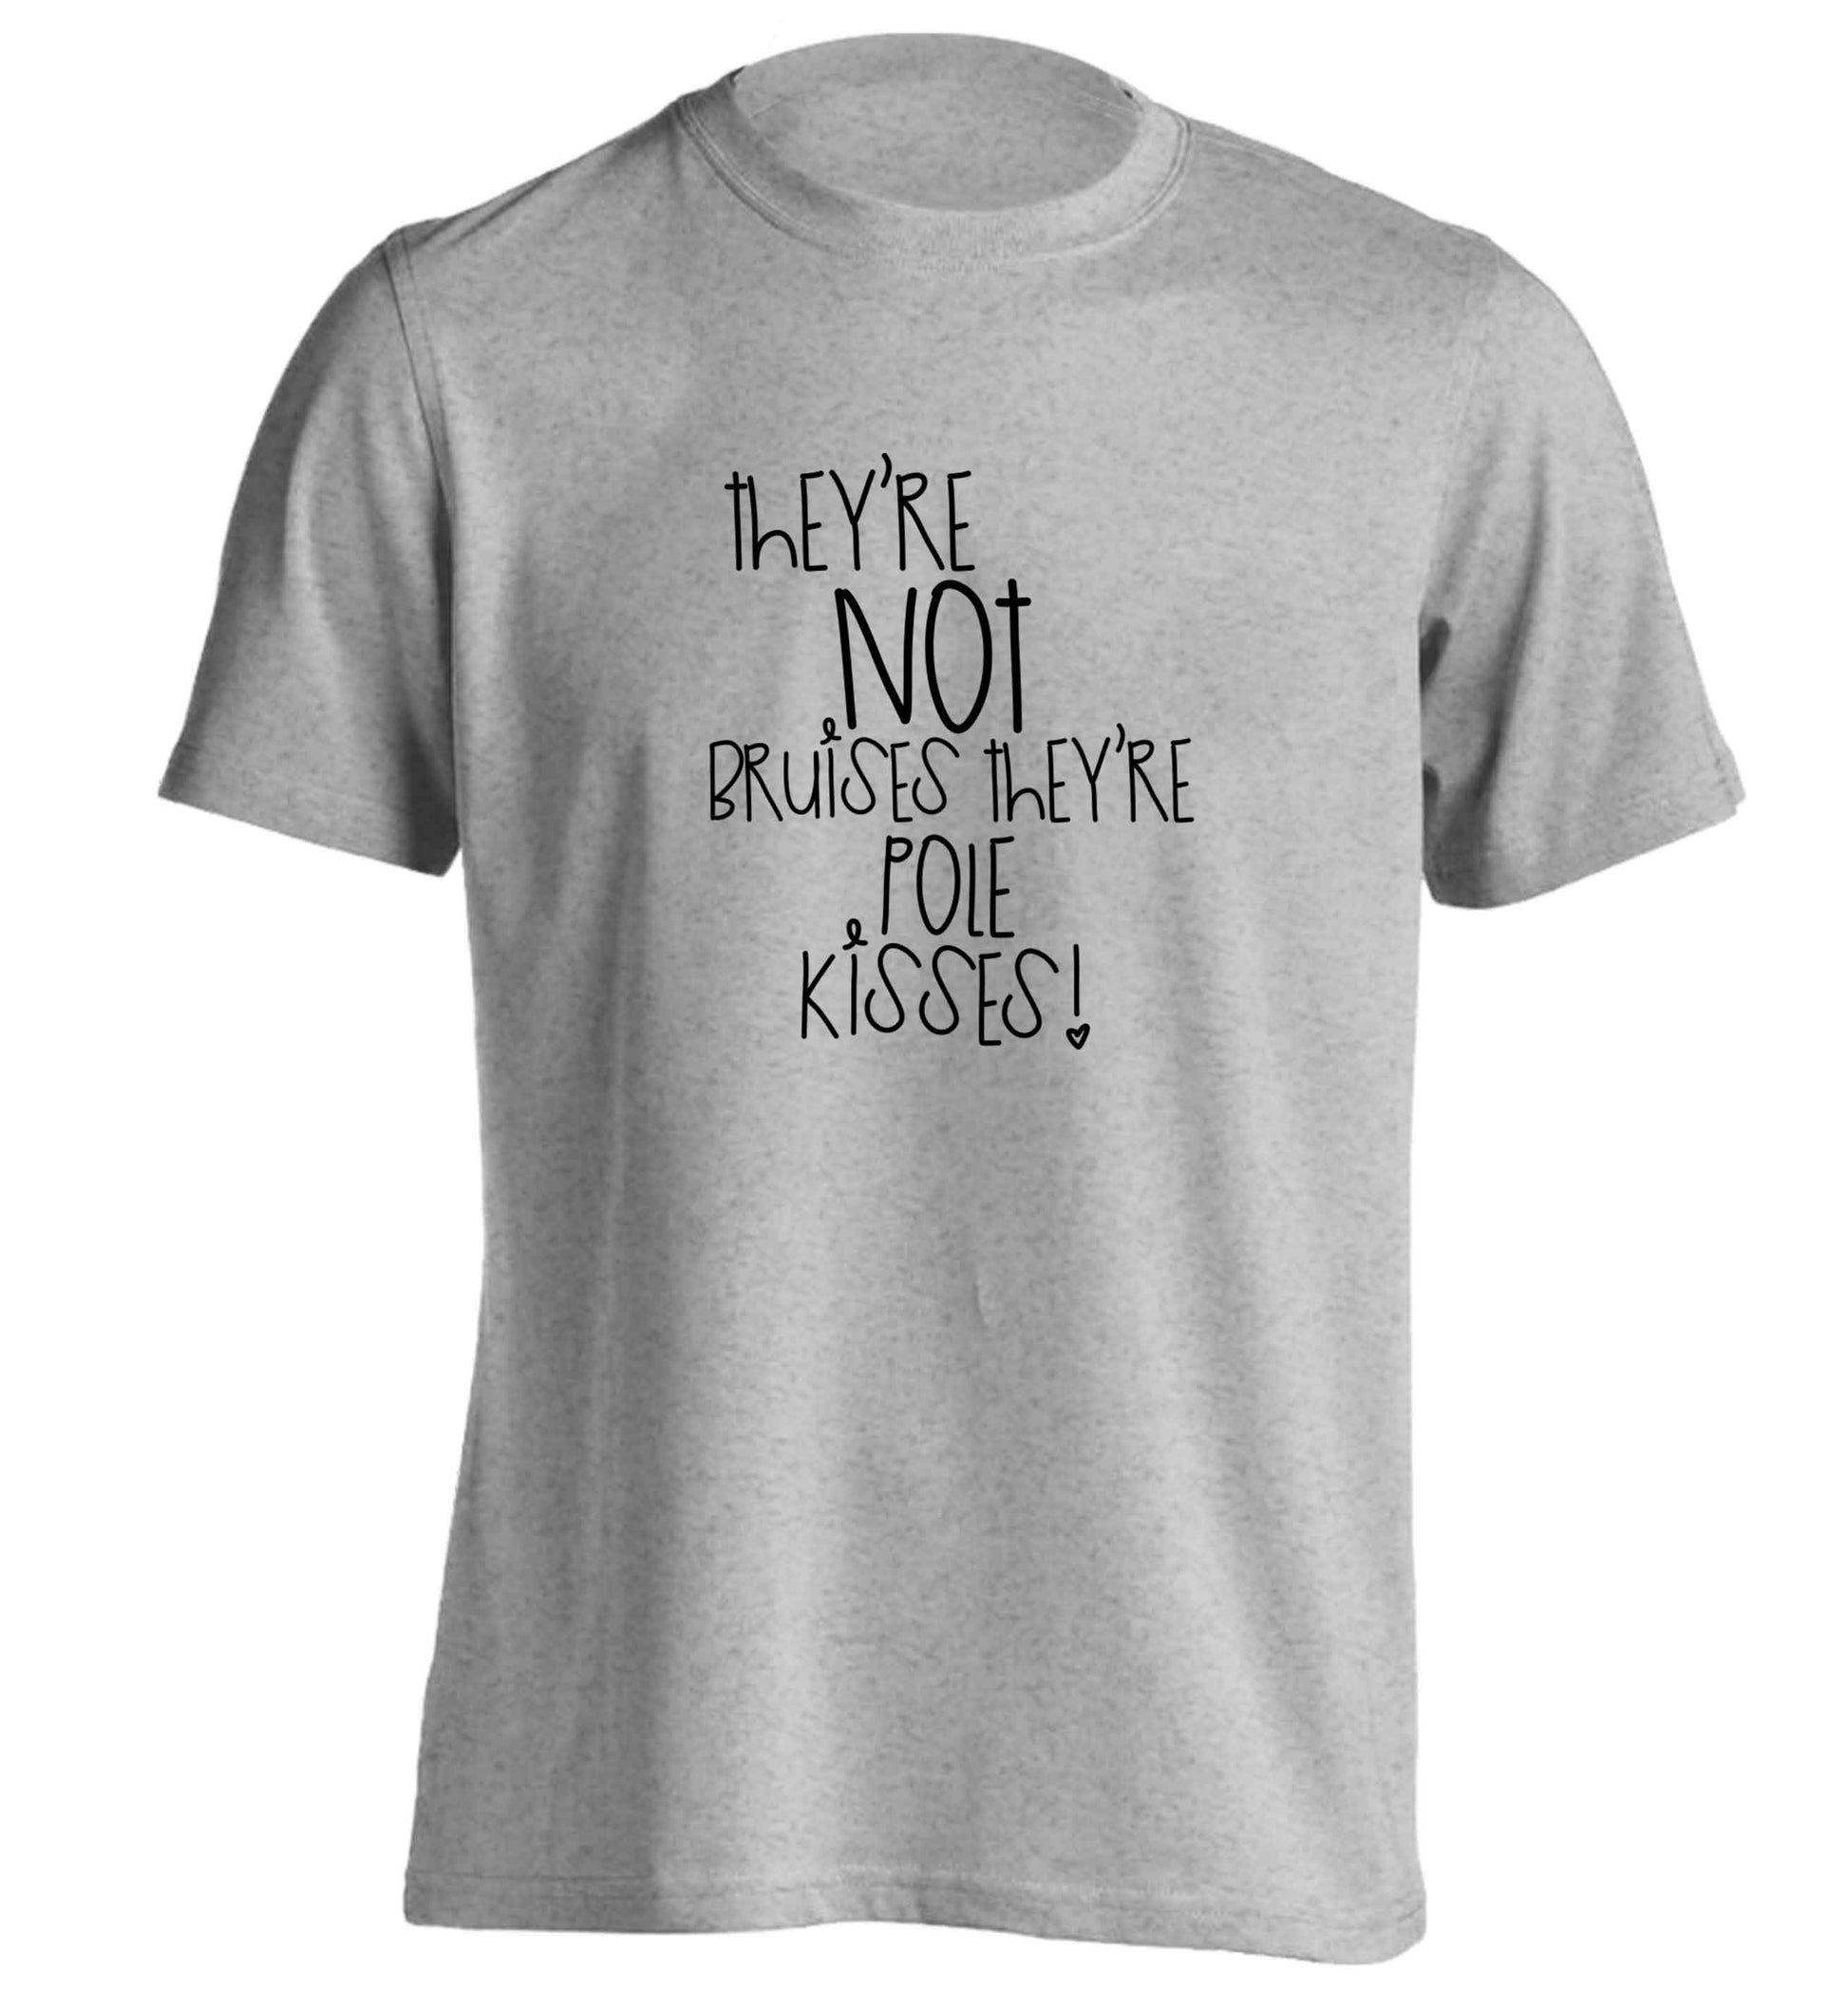 They're not bruises they're pole kisses adults unisex grey Tshirt 2XL